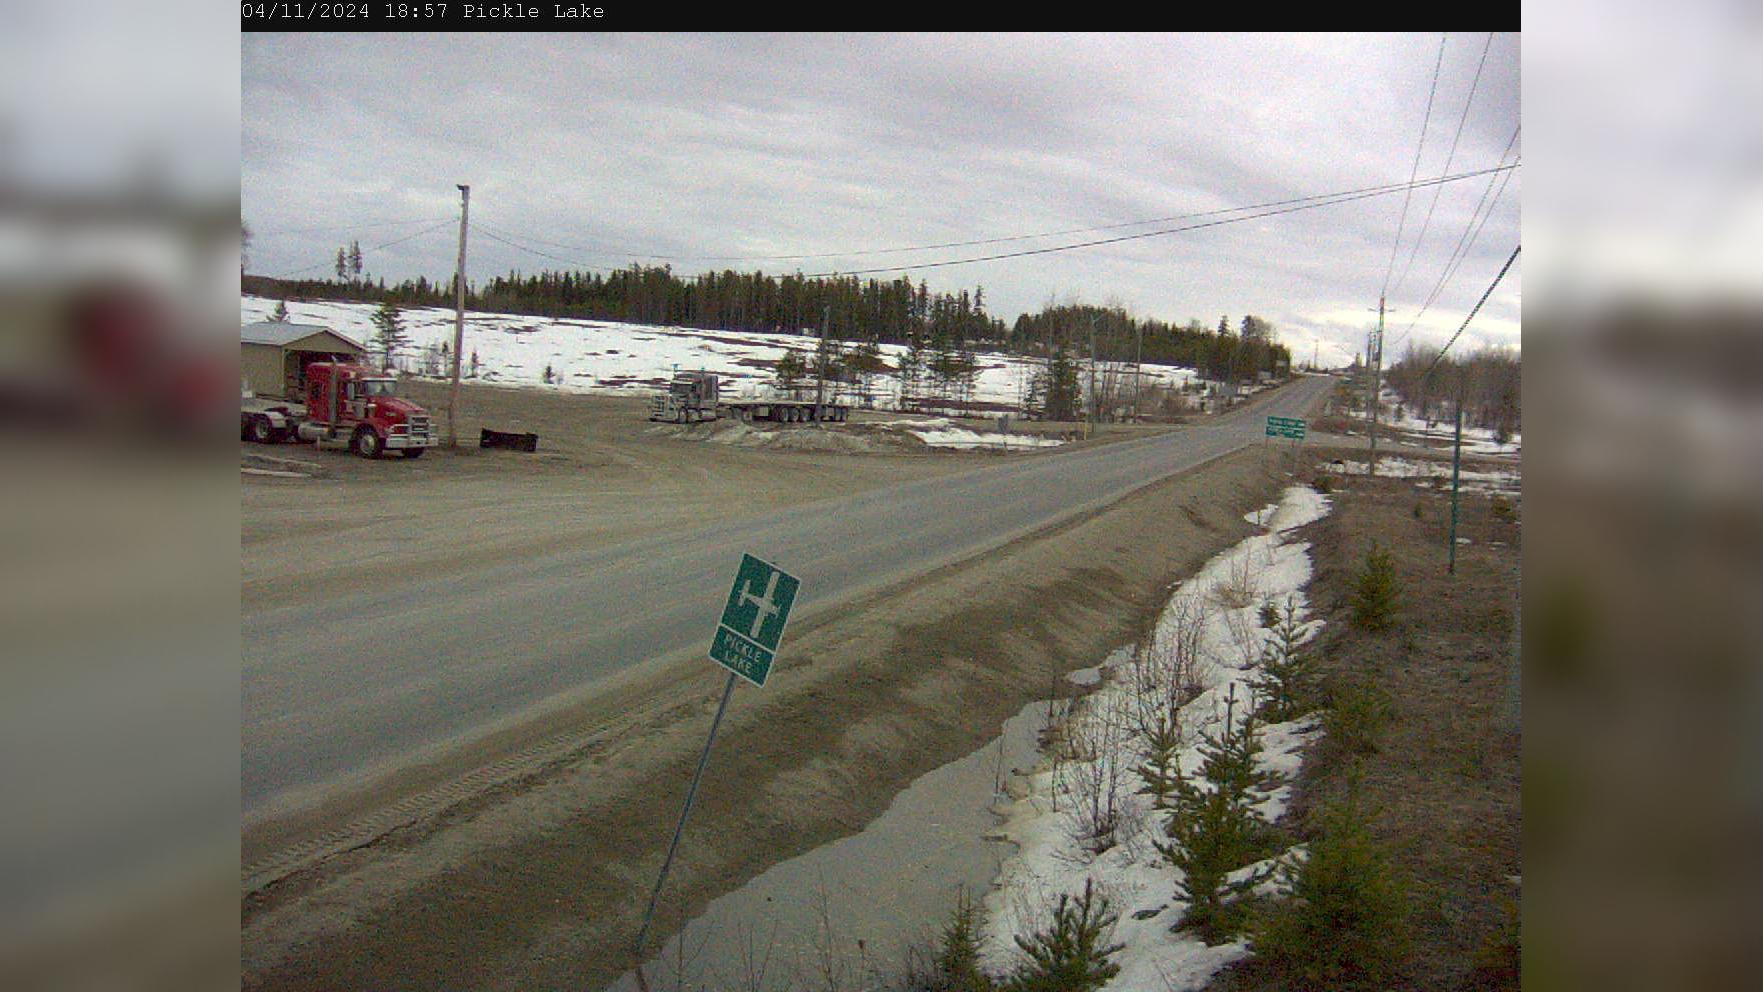 Traffic Cam Pickle Lake Township: Highway 599 near Pickle Lake Player